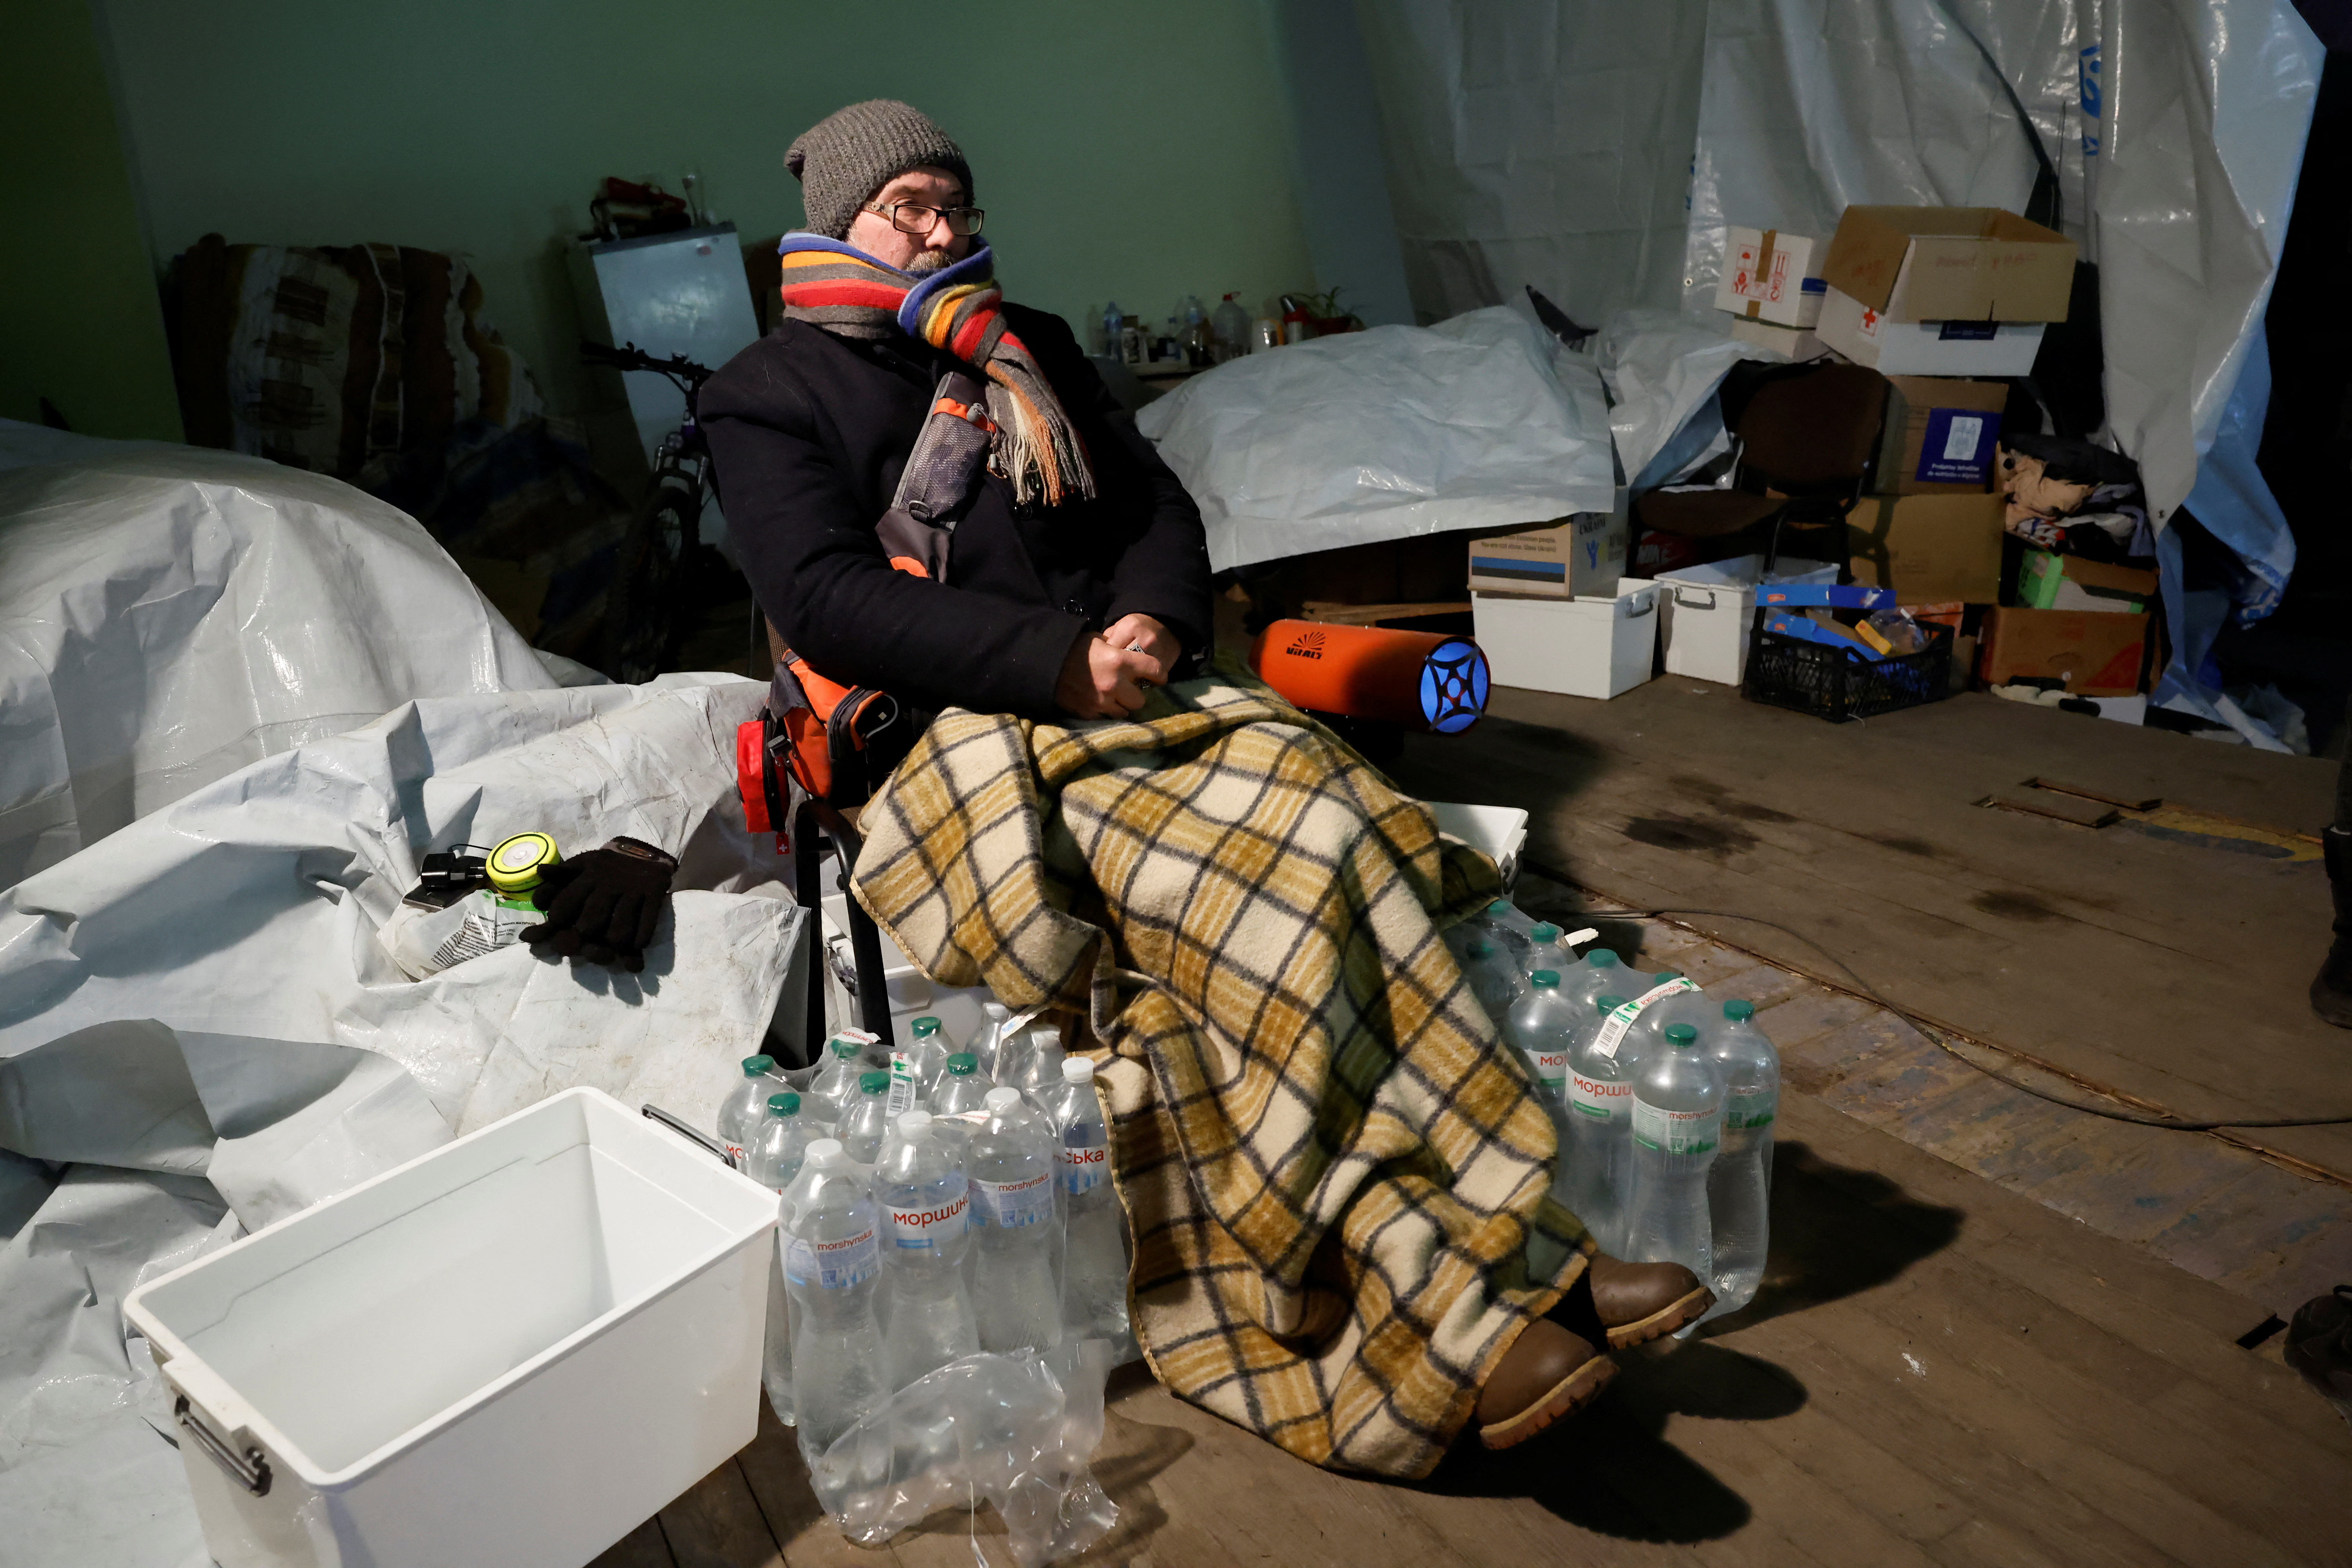 A man warms himself with blankets in a shelter, in Bakhmut